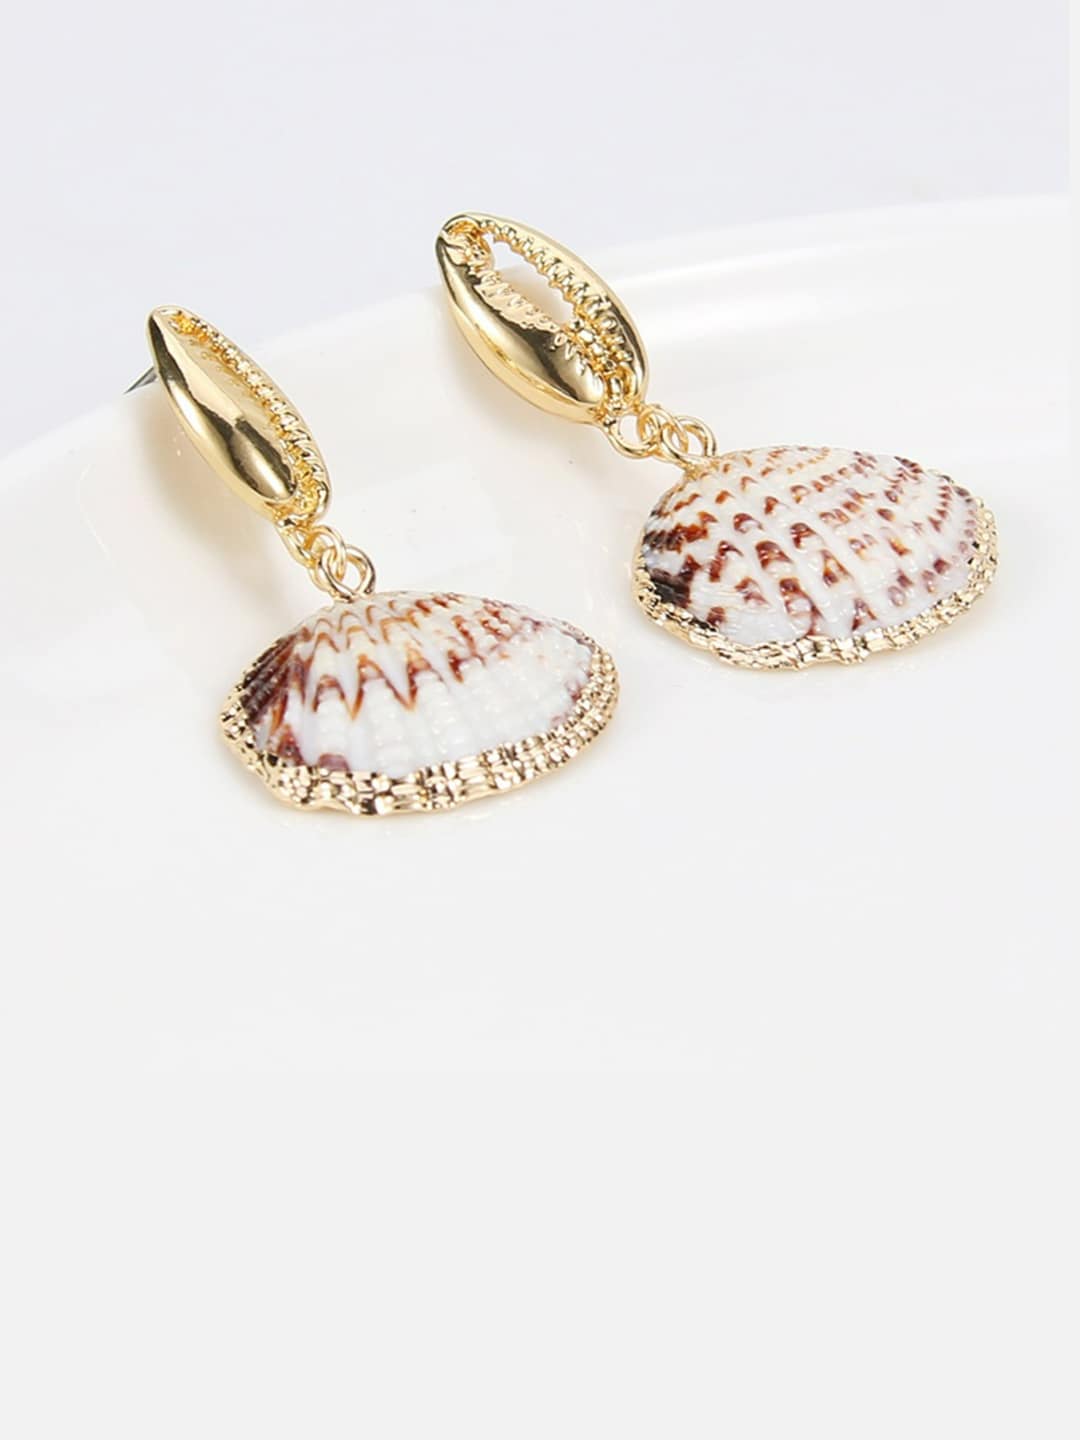 EL REGALO White Oval Jhumkas Earrings - for Women and Girls
Style ID: 17025038